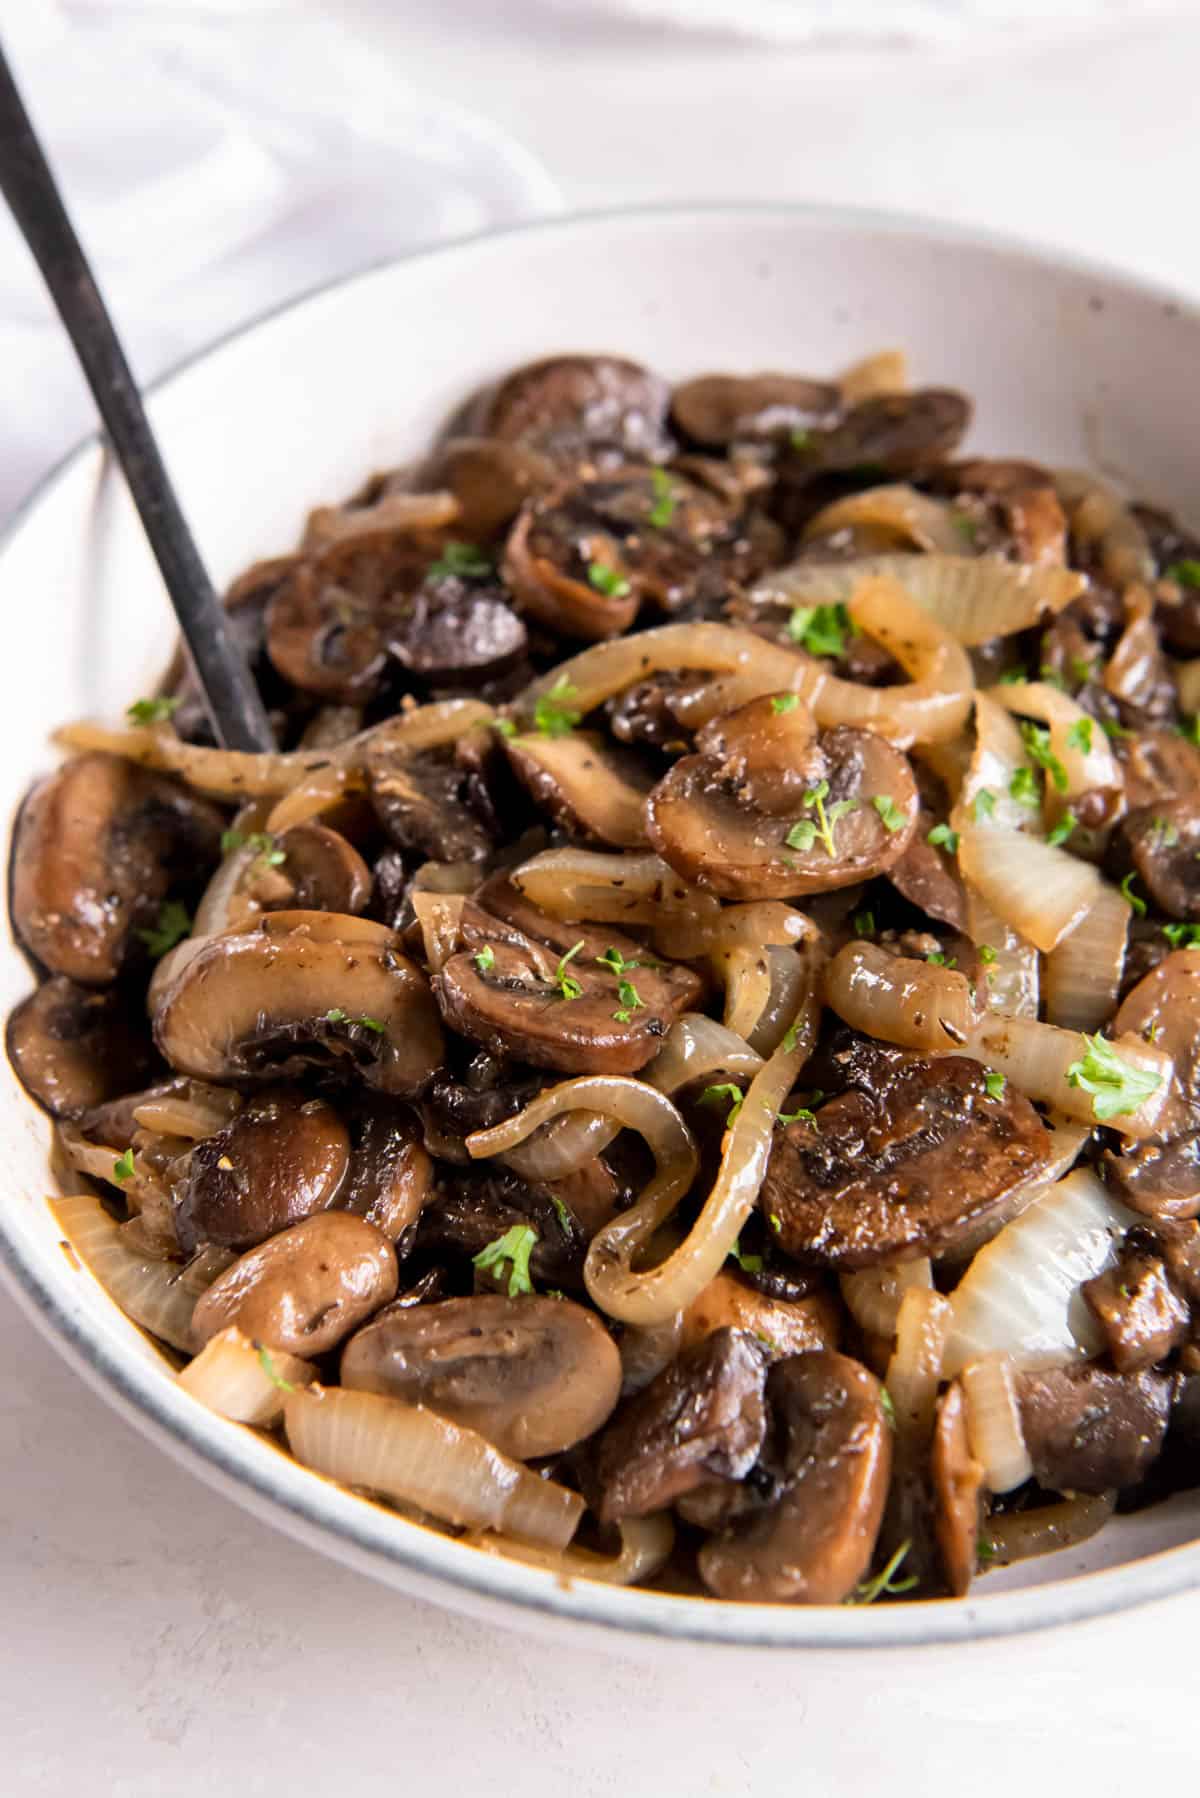 Sautéed mushrooms and onions in a white bowl on a white tabletop.